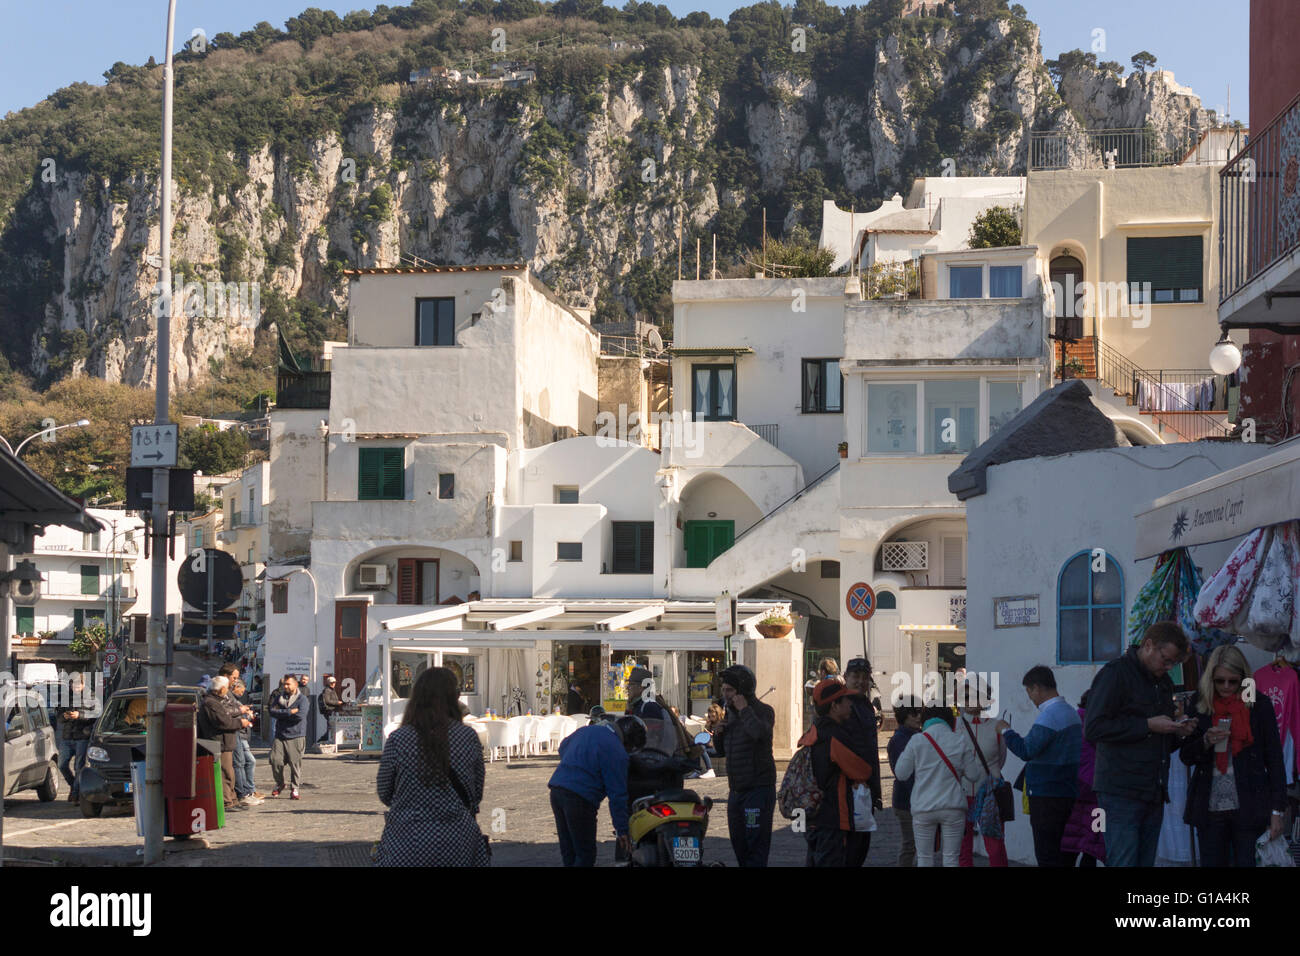 Morning sunshine hits white Mediterranean buildings at the Marina Grande harbour where locals and tourists mingle. Capri island, Italy Stock Photo